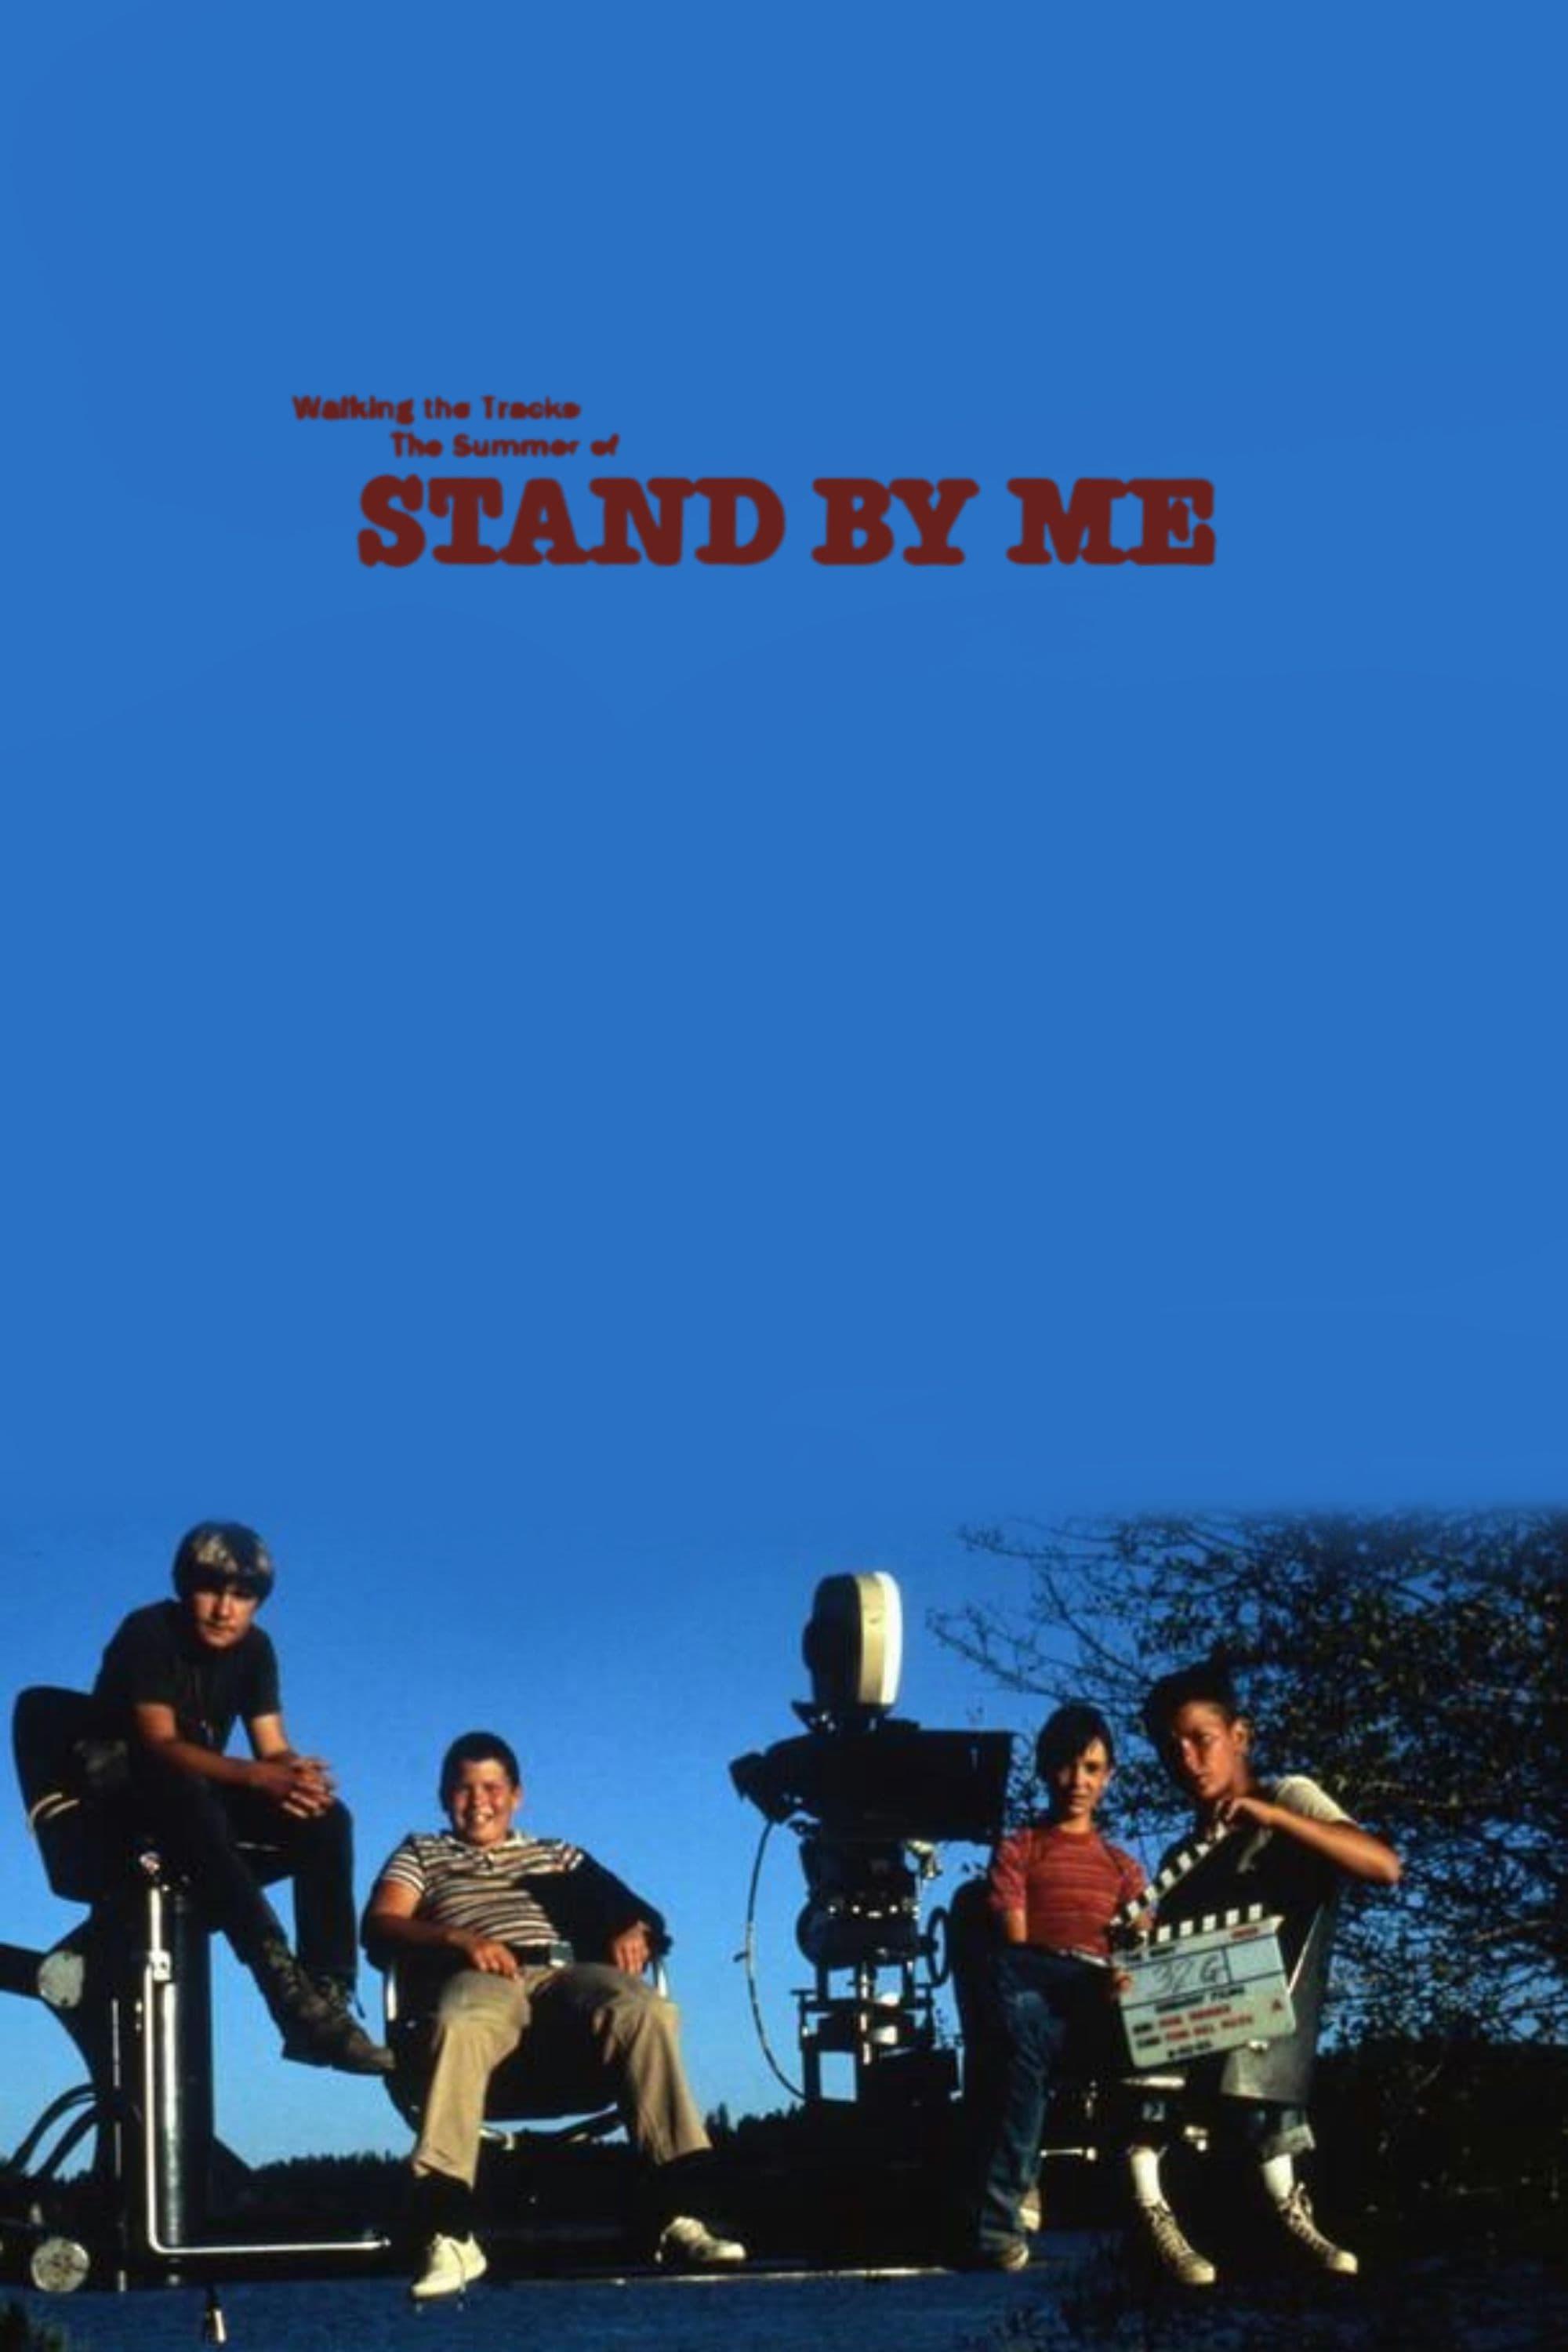 Walking the Tracks: The Summer of Stand by Me poster